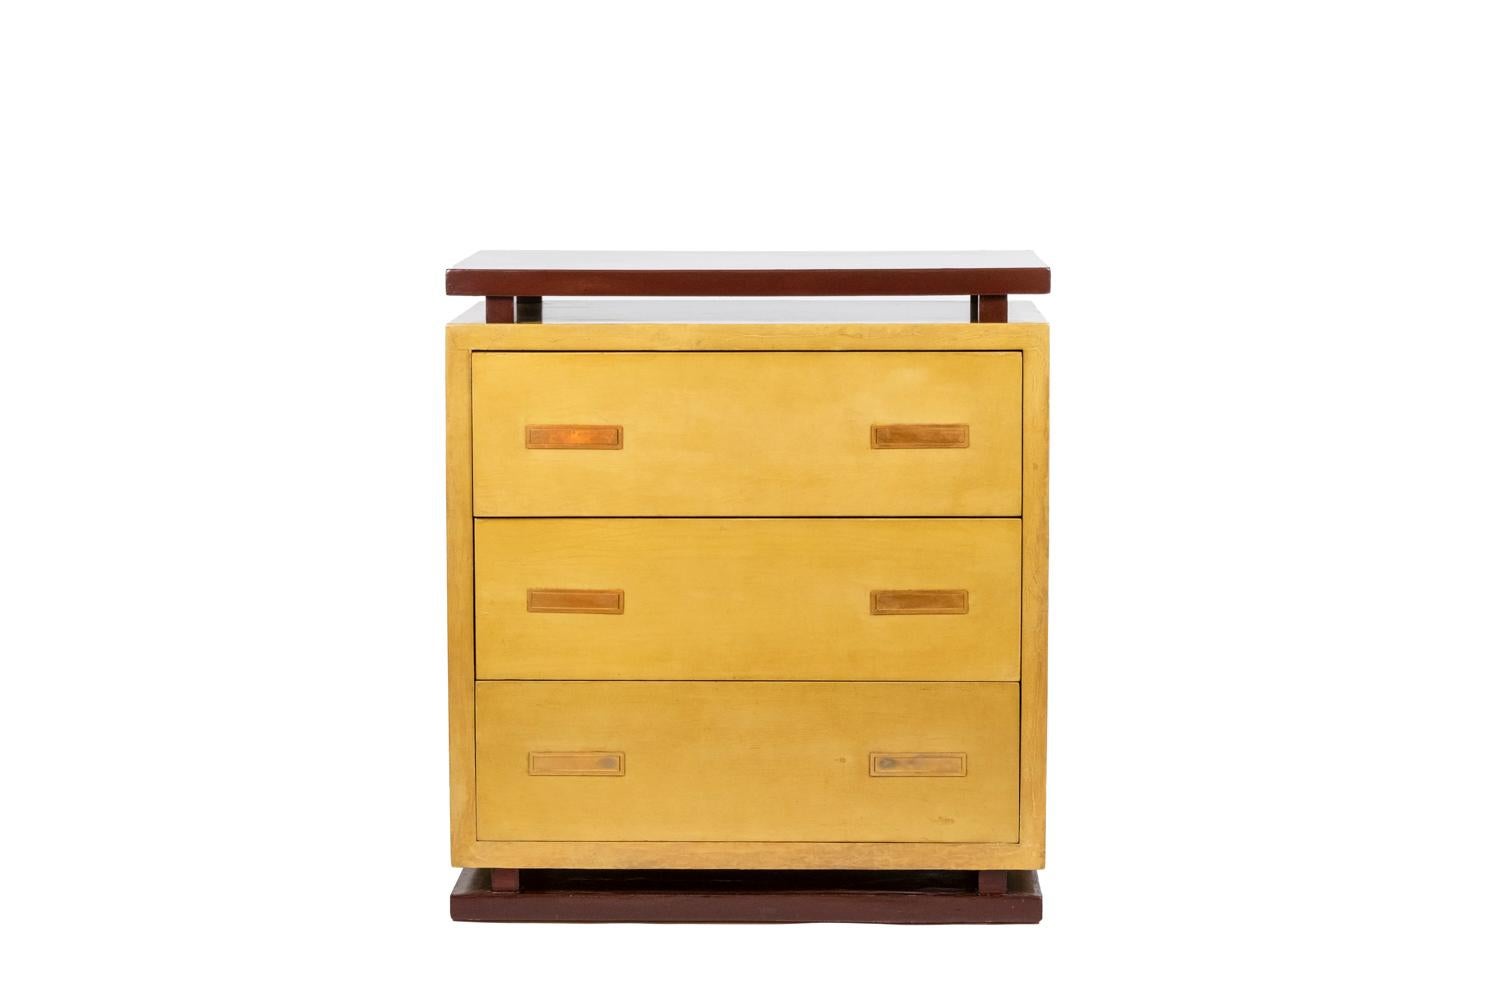 Chest of drawers in Art Deco style in cream-coloured lacquer, opening with three drawers in front. Top and base in burgundy color. Brass handles with a pusher to hold the handle in the hand, rectangular in shape.

Work of a French decorator from